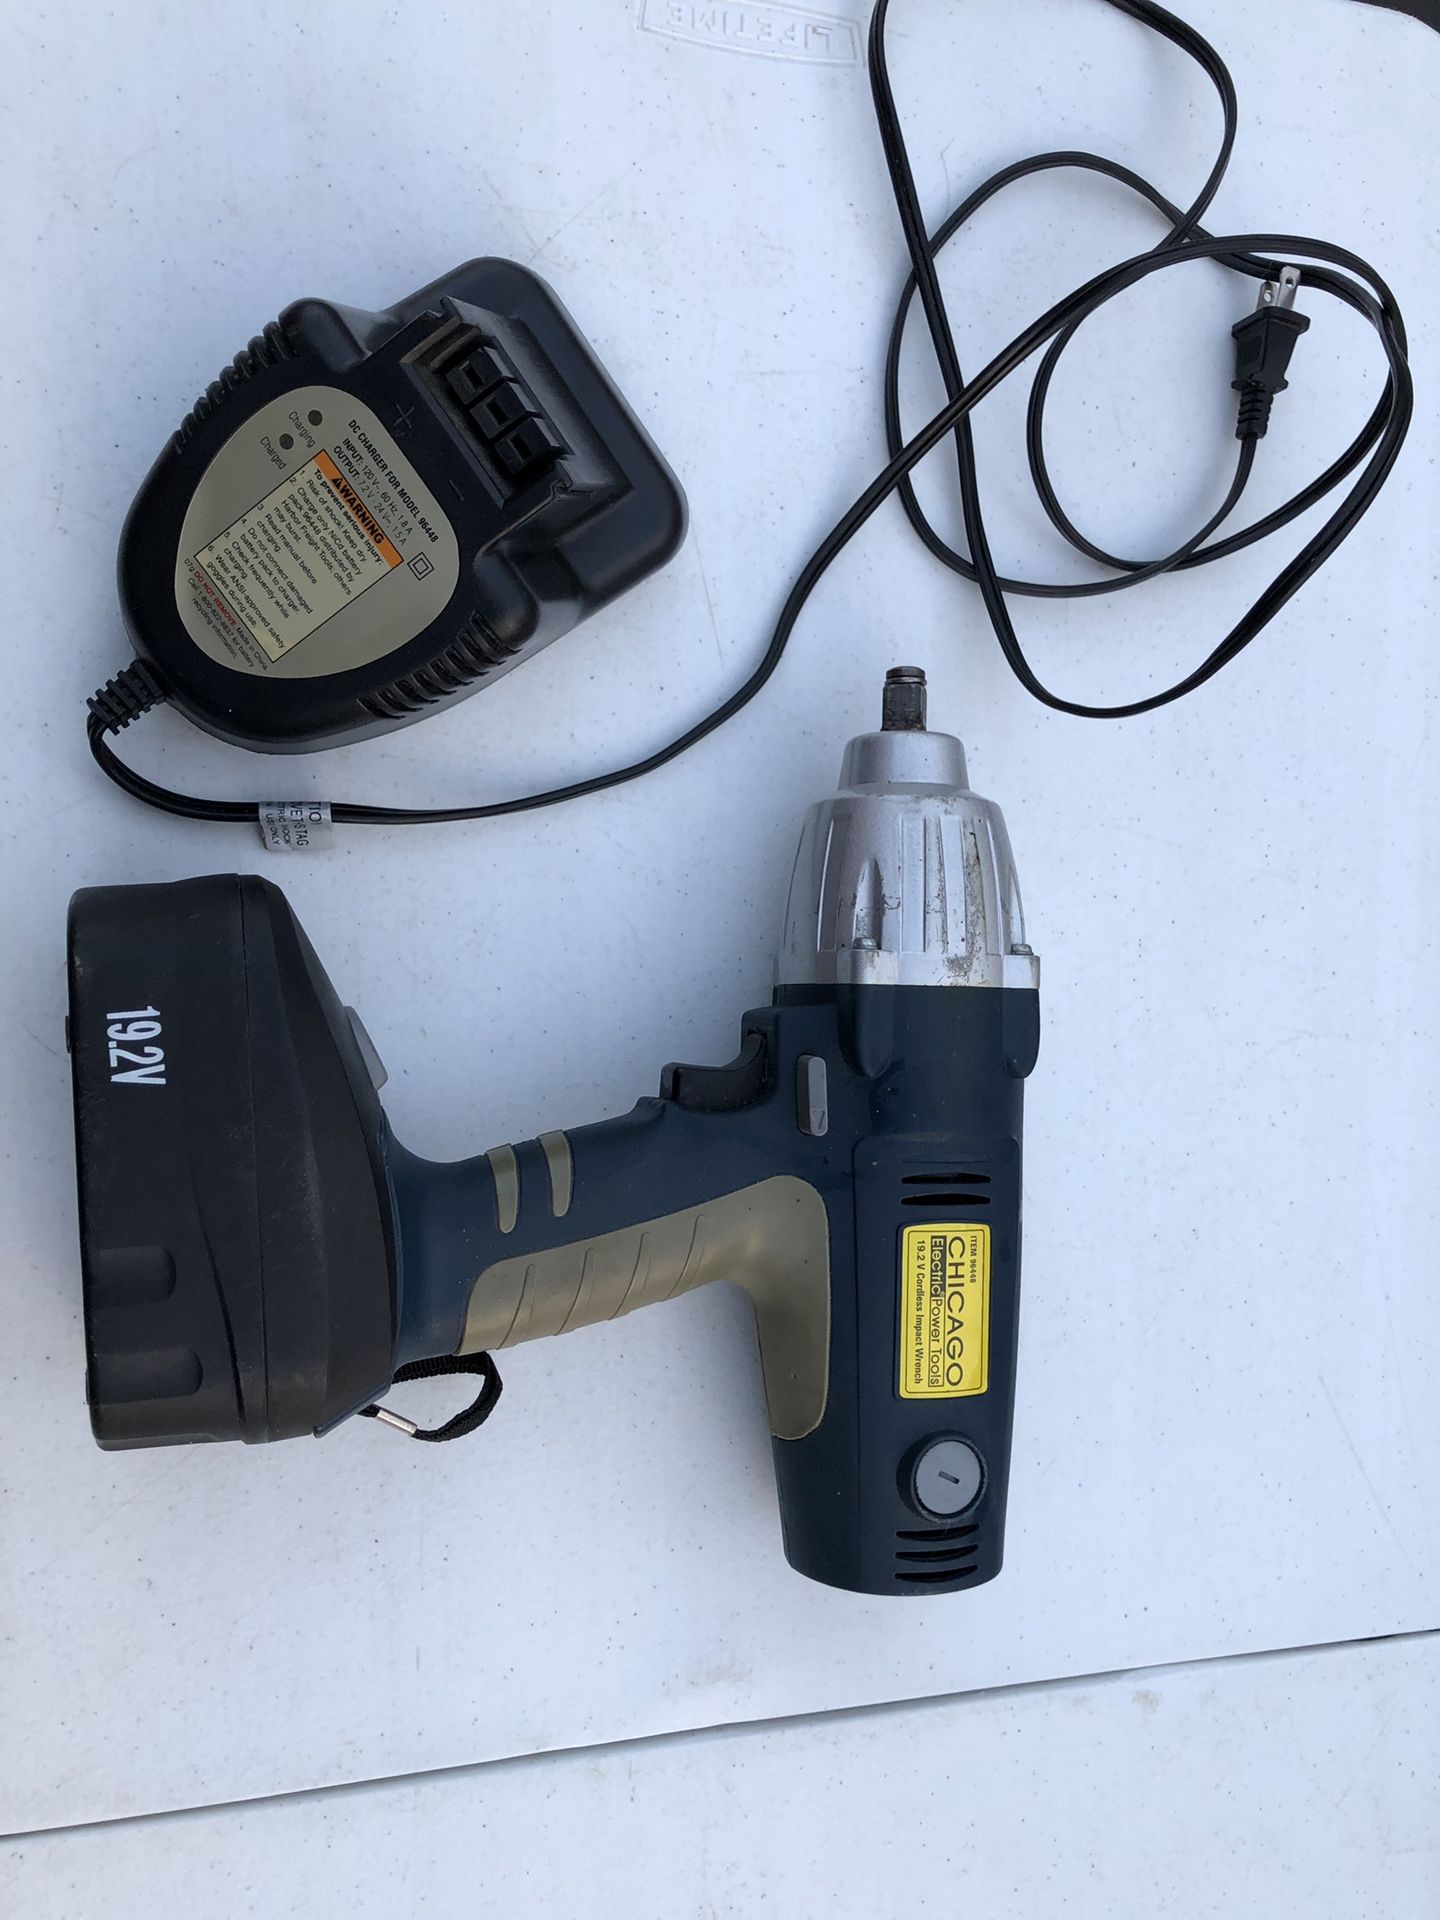 Chicago cordless impact wrench 19.2v w/battery and charger